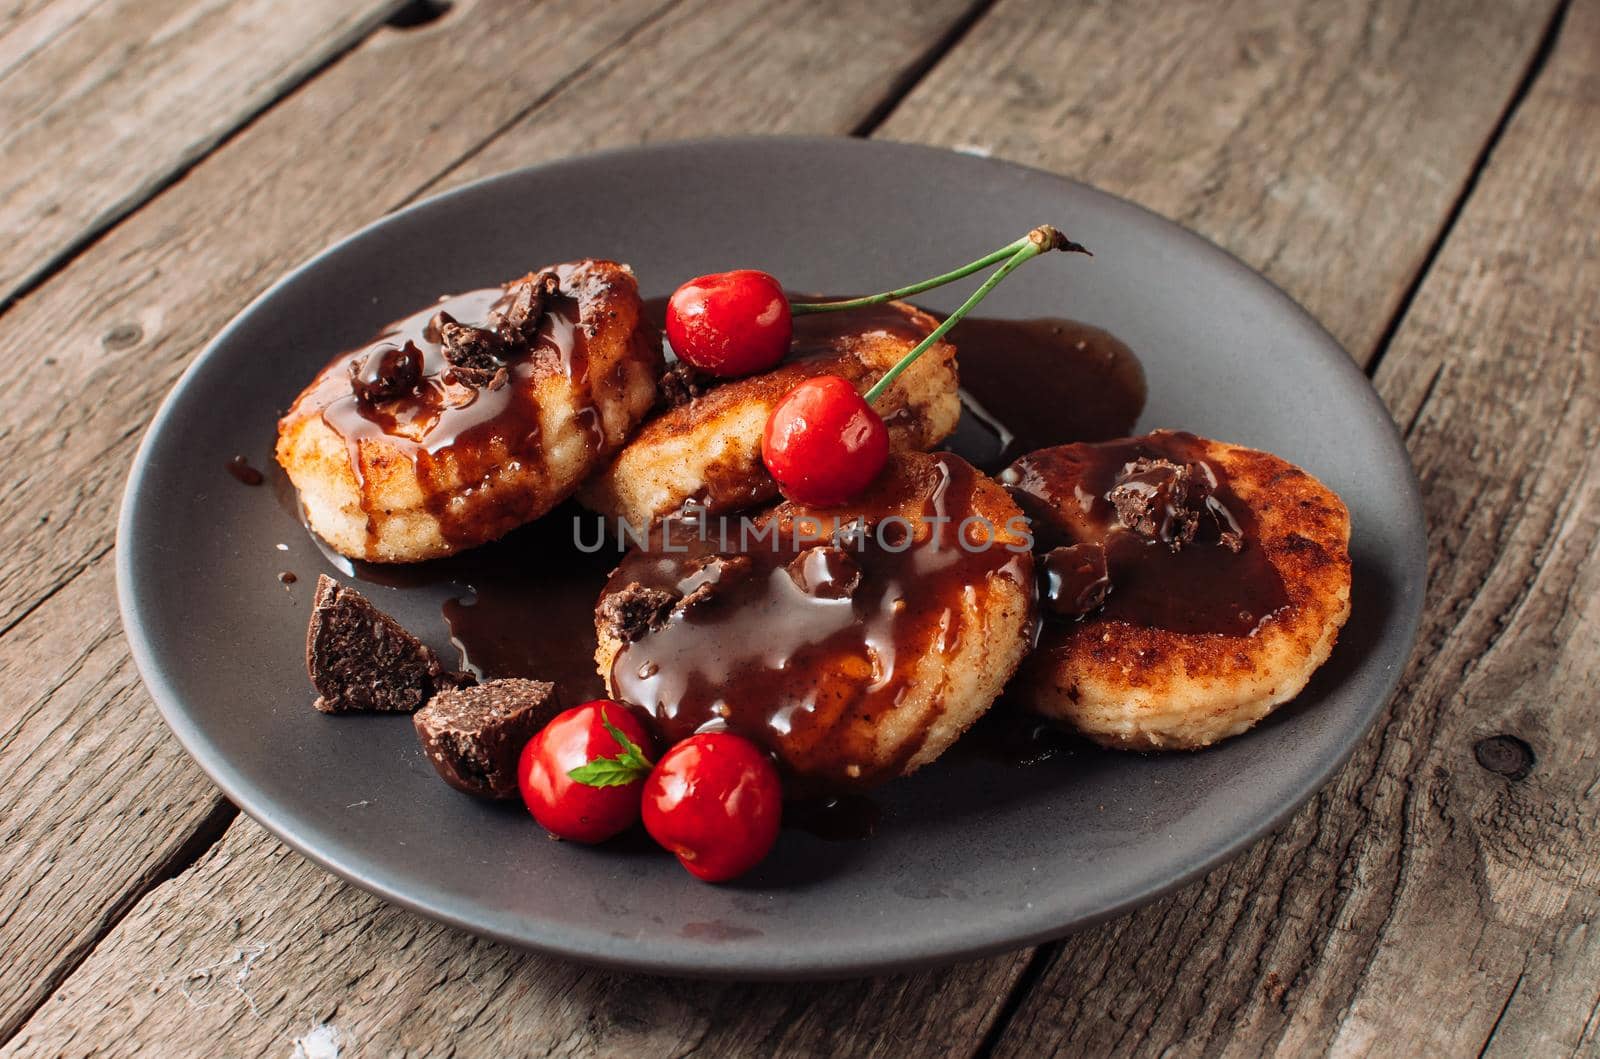 Gourmet breakfast - curd pancakes, cheesecakes, curd pancakes with cherries and chocolate in a brown plate. Wholesome dessert on a wooden table in a rustic style. Selective focus